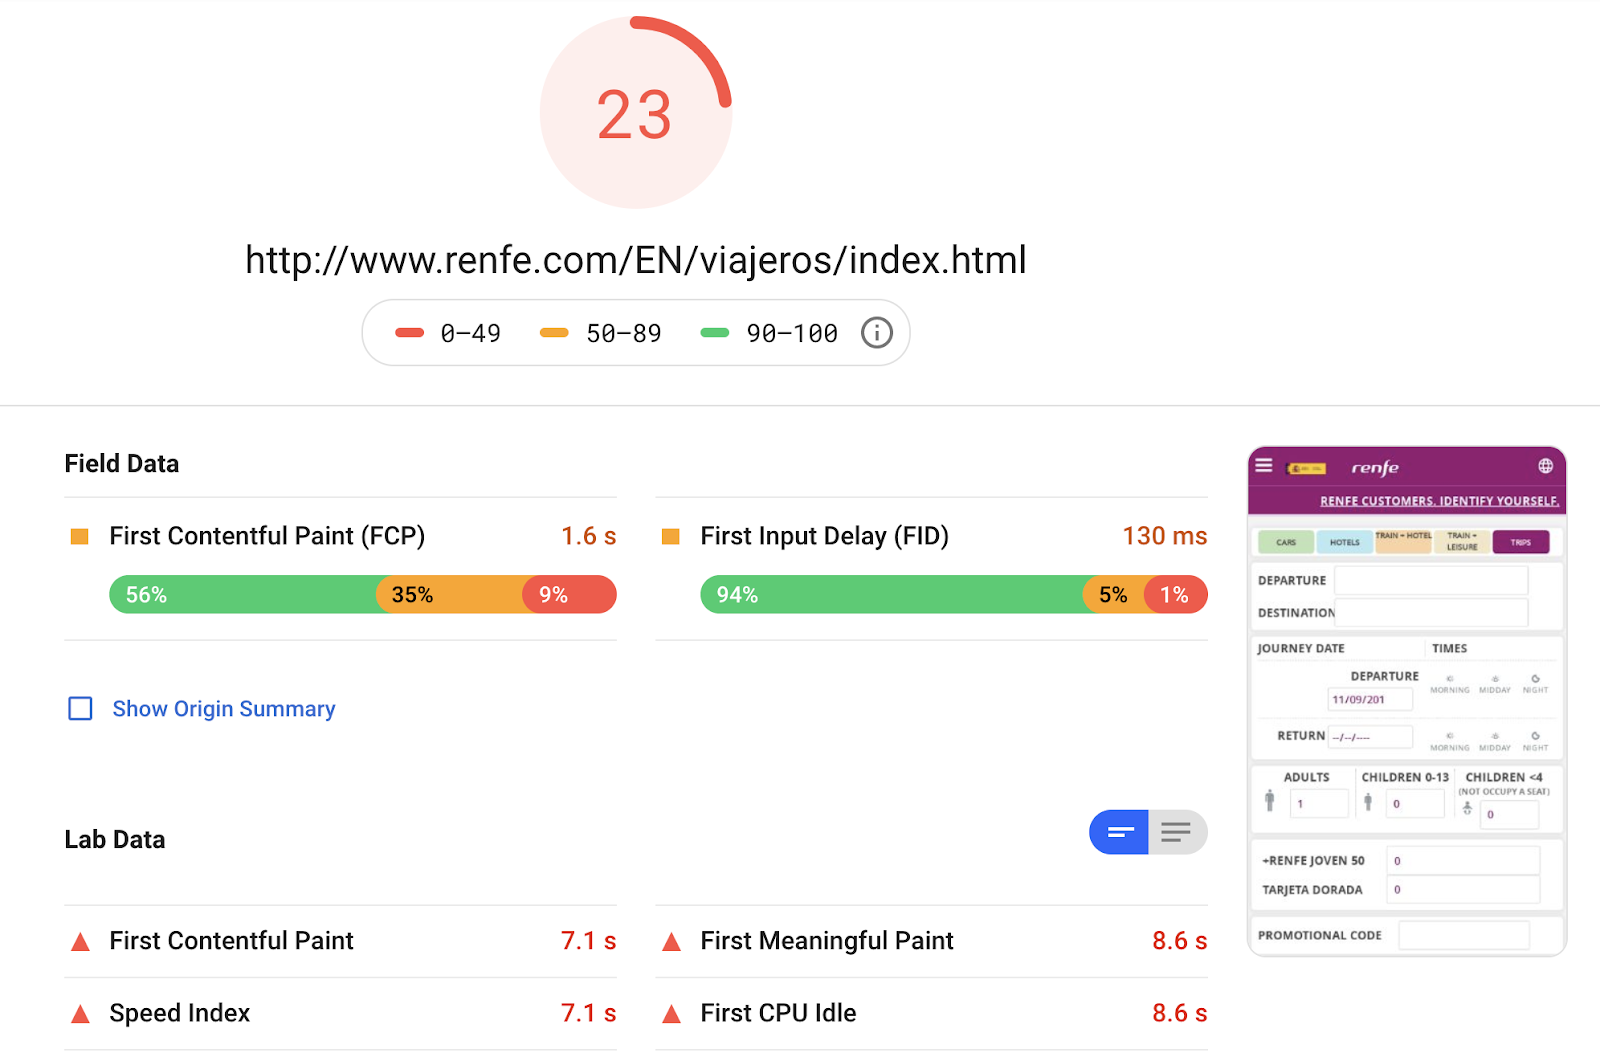 Google PageSpeed insights score for Renfe.com is very poor